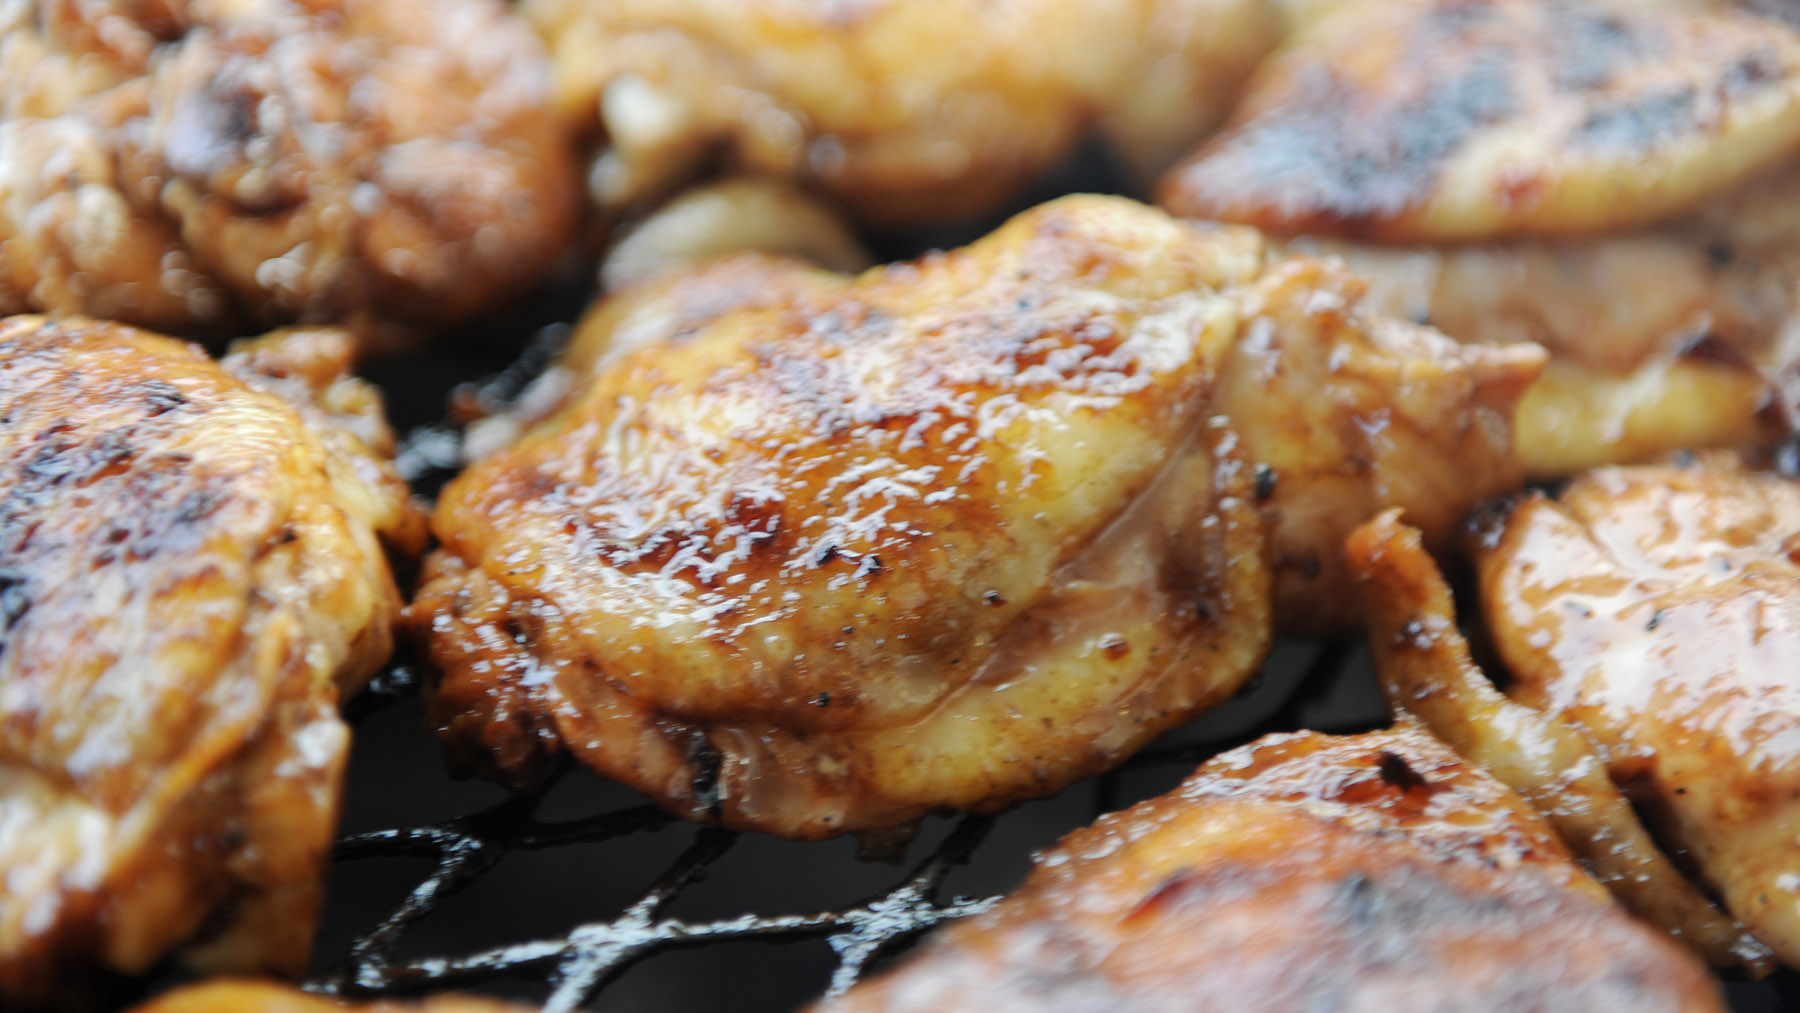 Stock image of chicken grilling on a barbeque (Image by RawPixel.com)